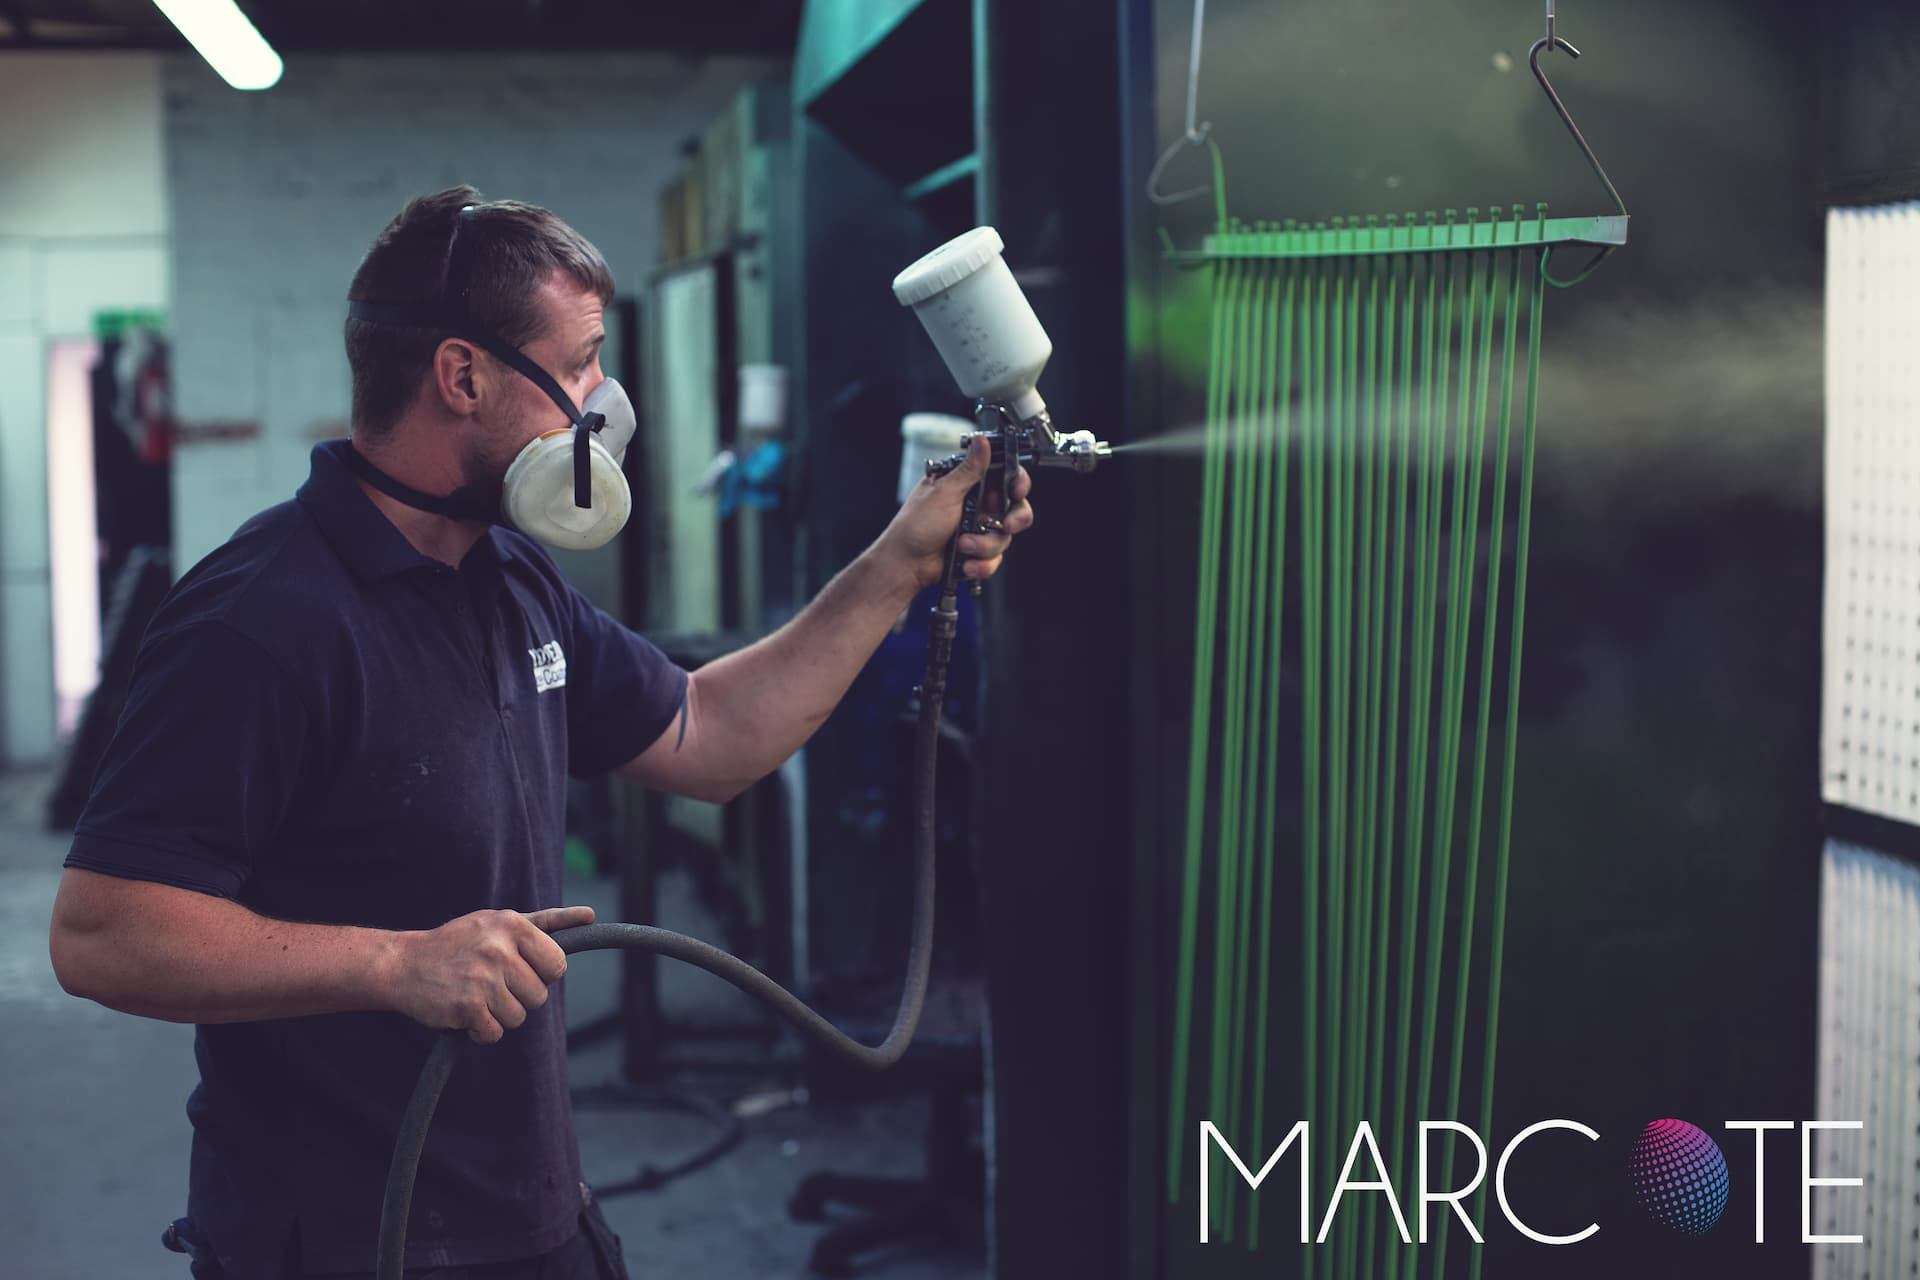 Marcote expert spraying parts with coating